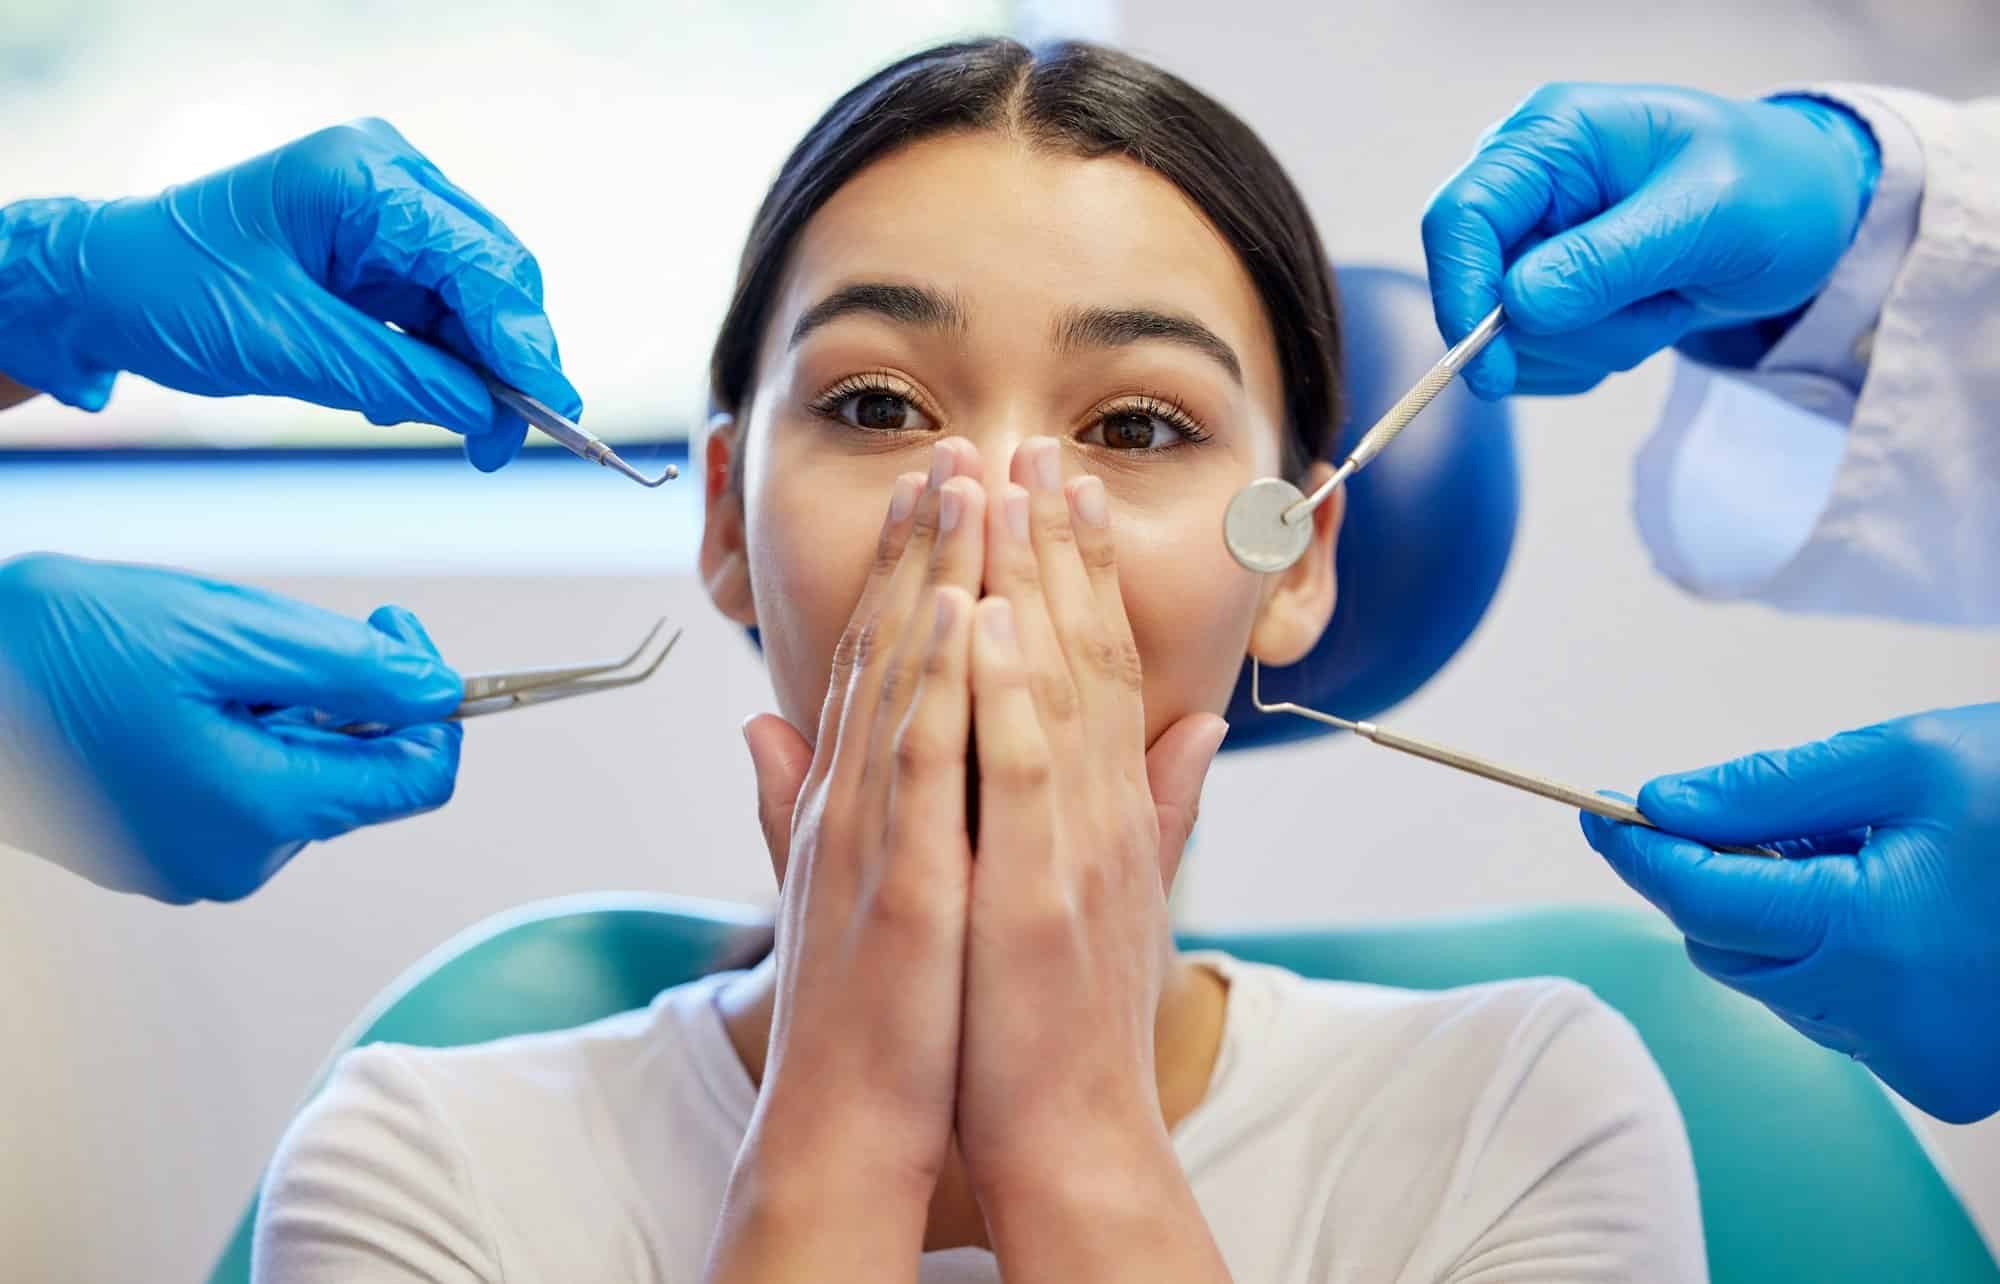 Anxious young woman covering her mouth in a dental chair as dentists attempt to examine her teeth, highlighting dental anxiety at Mayfair Family Dentistry.